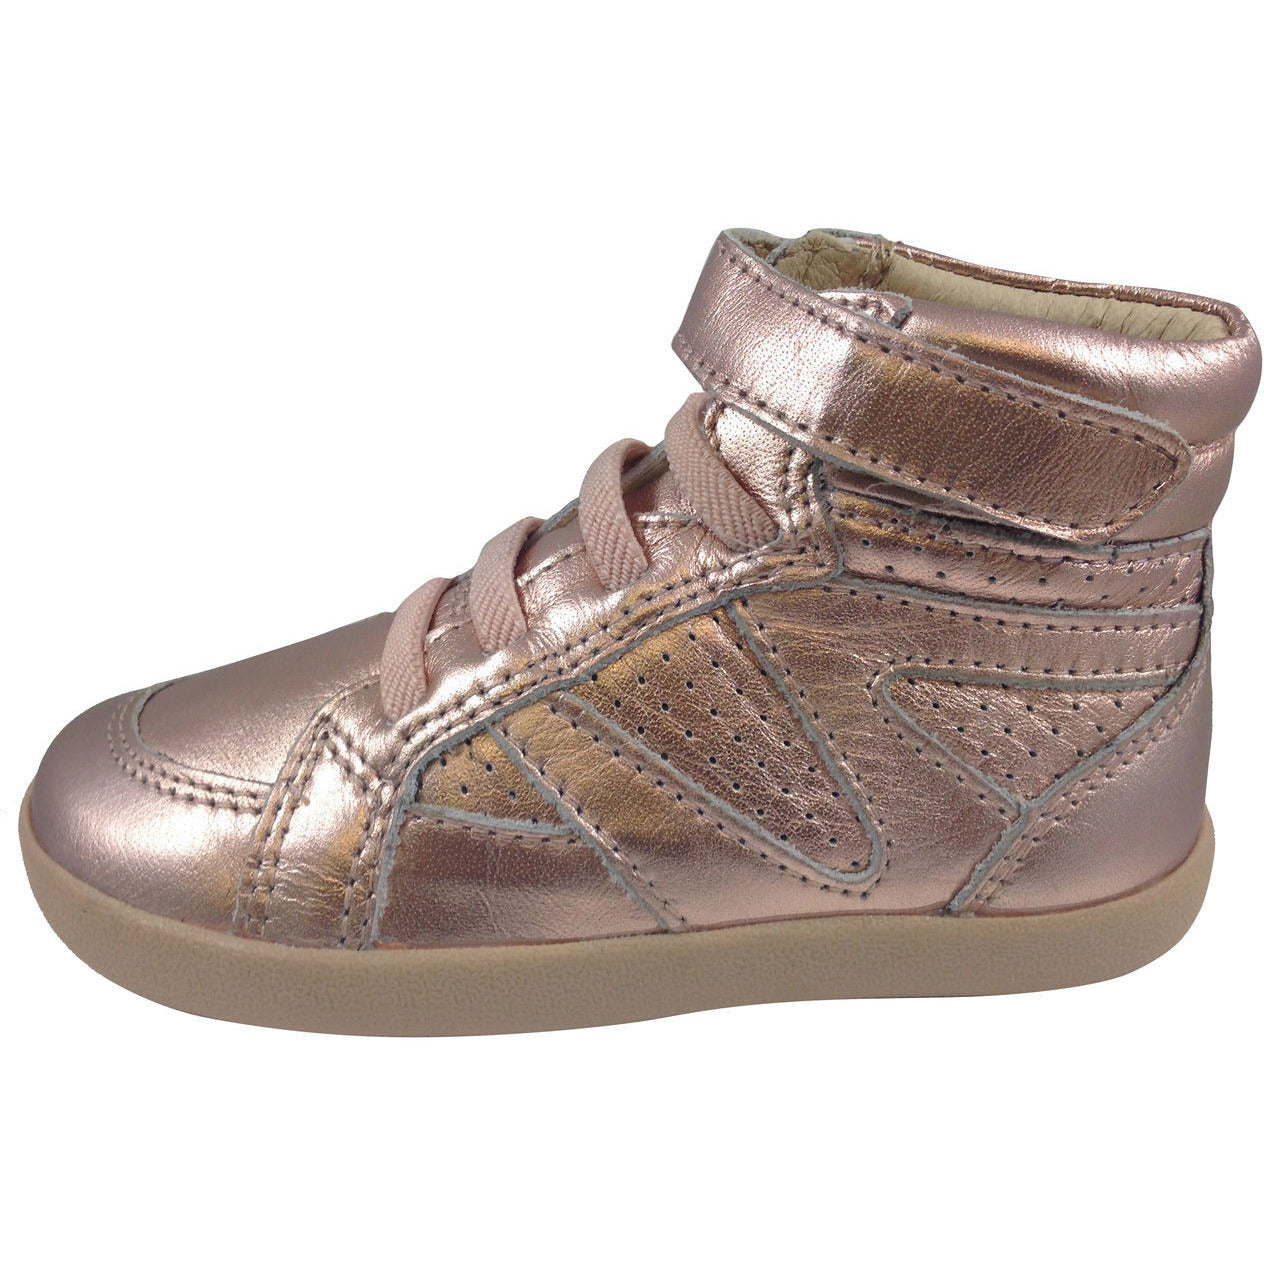 Old Soles Girl's Copper Leather Cheer Leader Hightops – Just Shoes for Kids